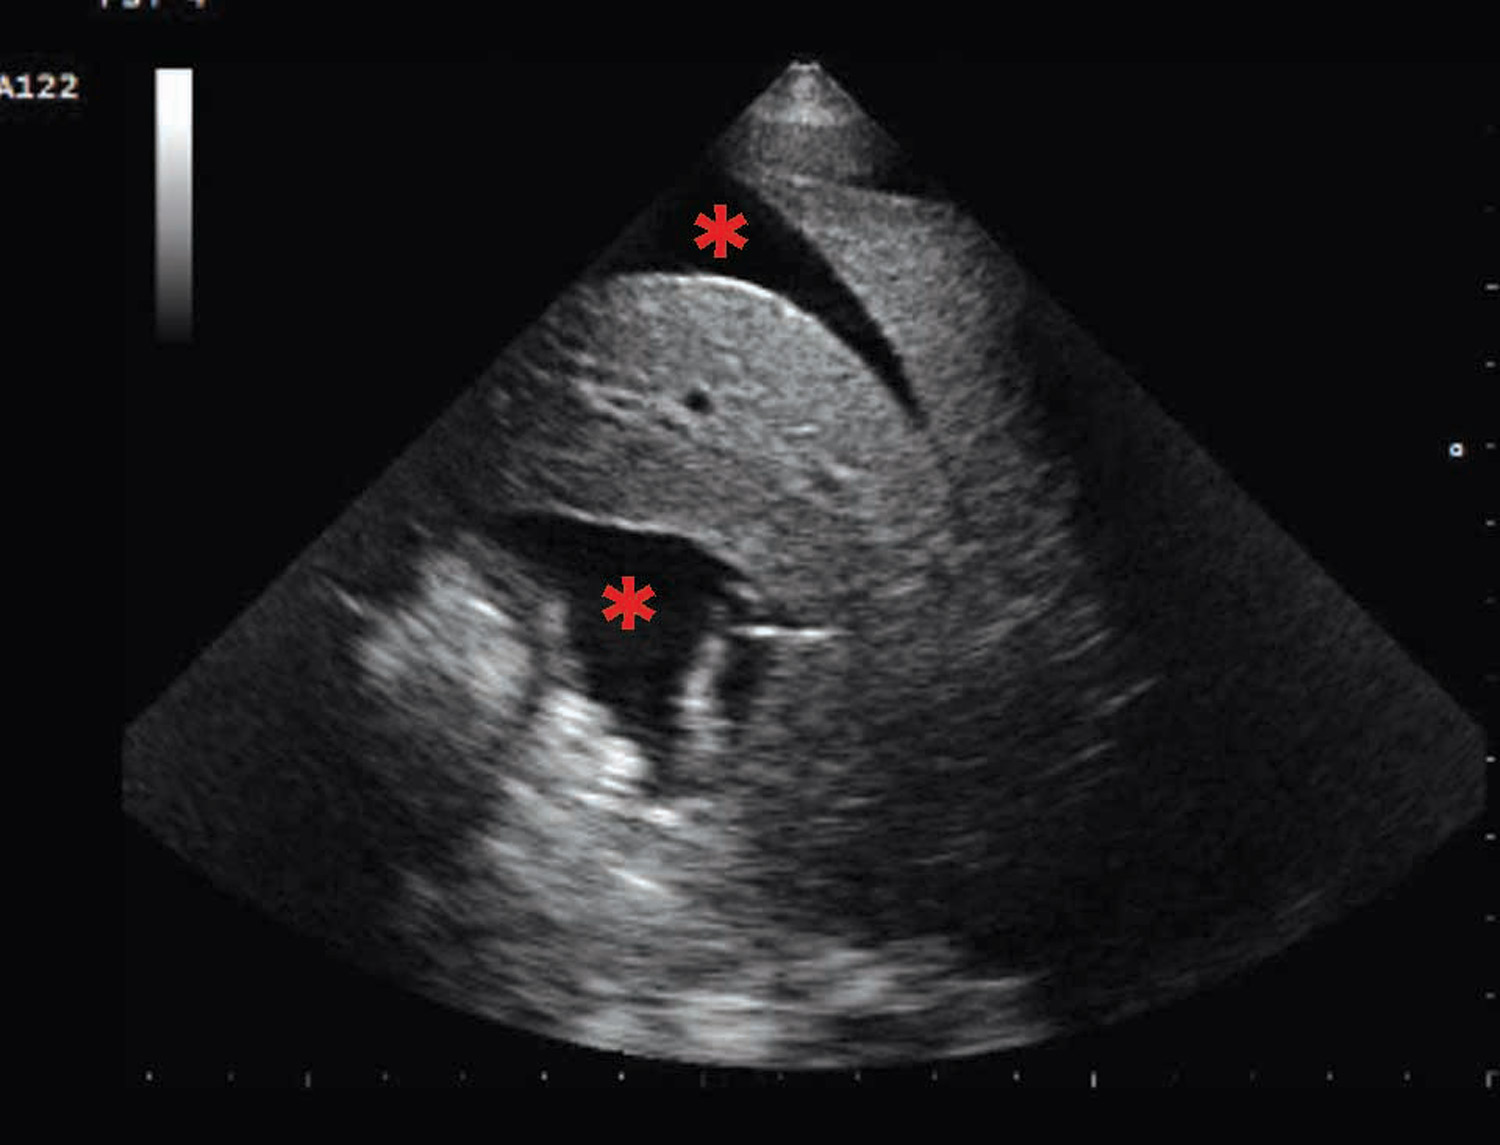 ascites revealed by the presence of a hypoechoeic area in the abdominal cavity 